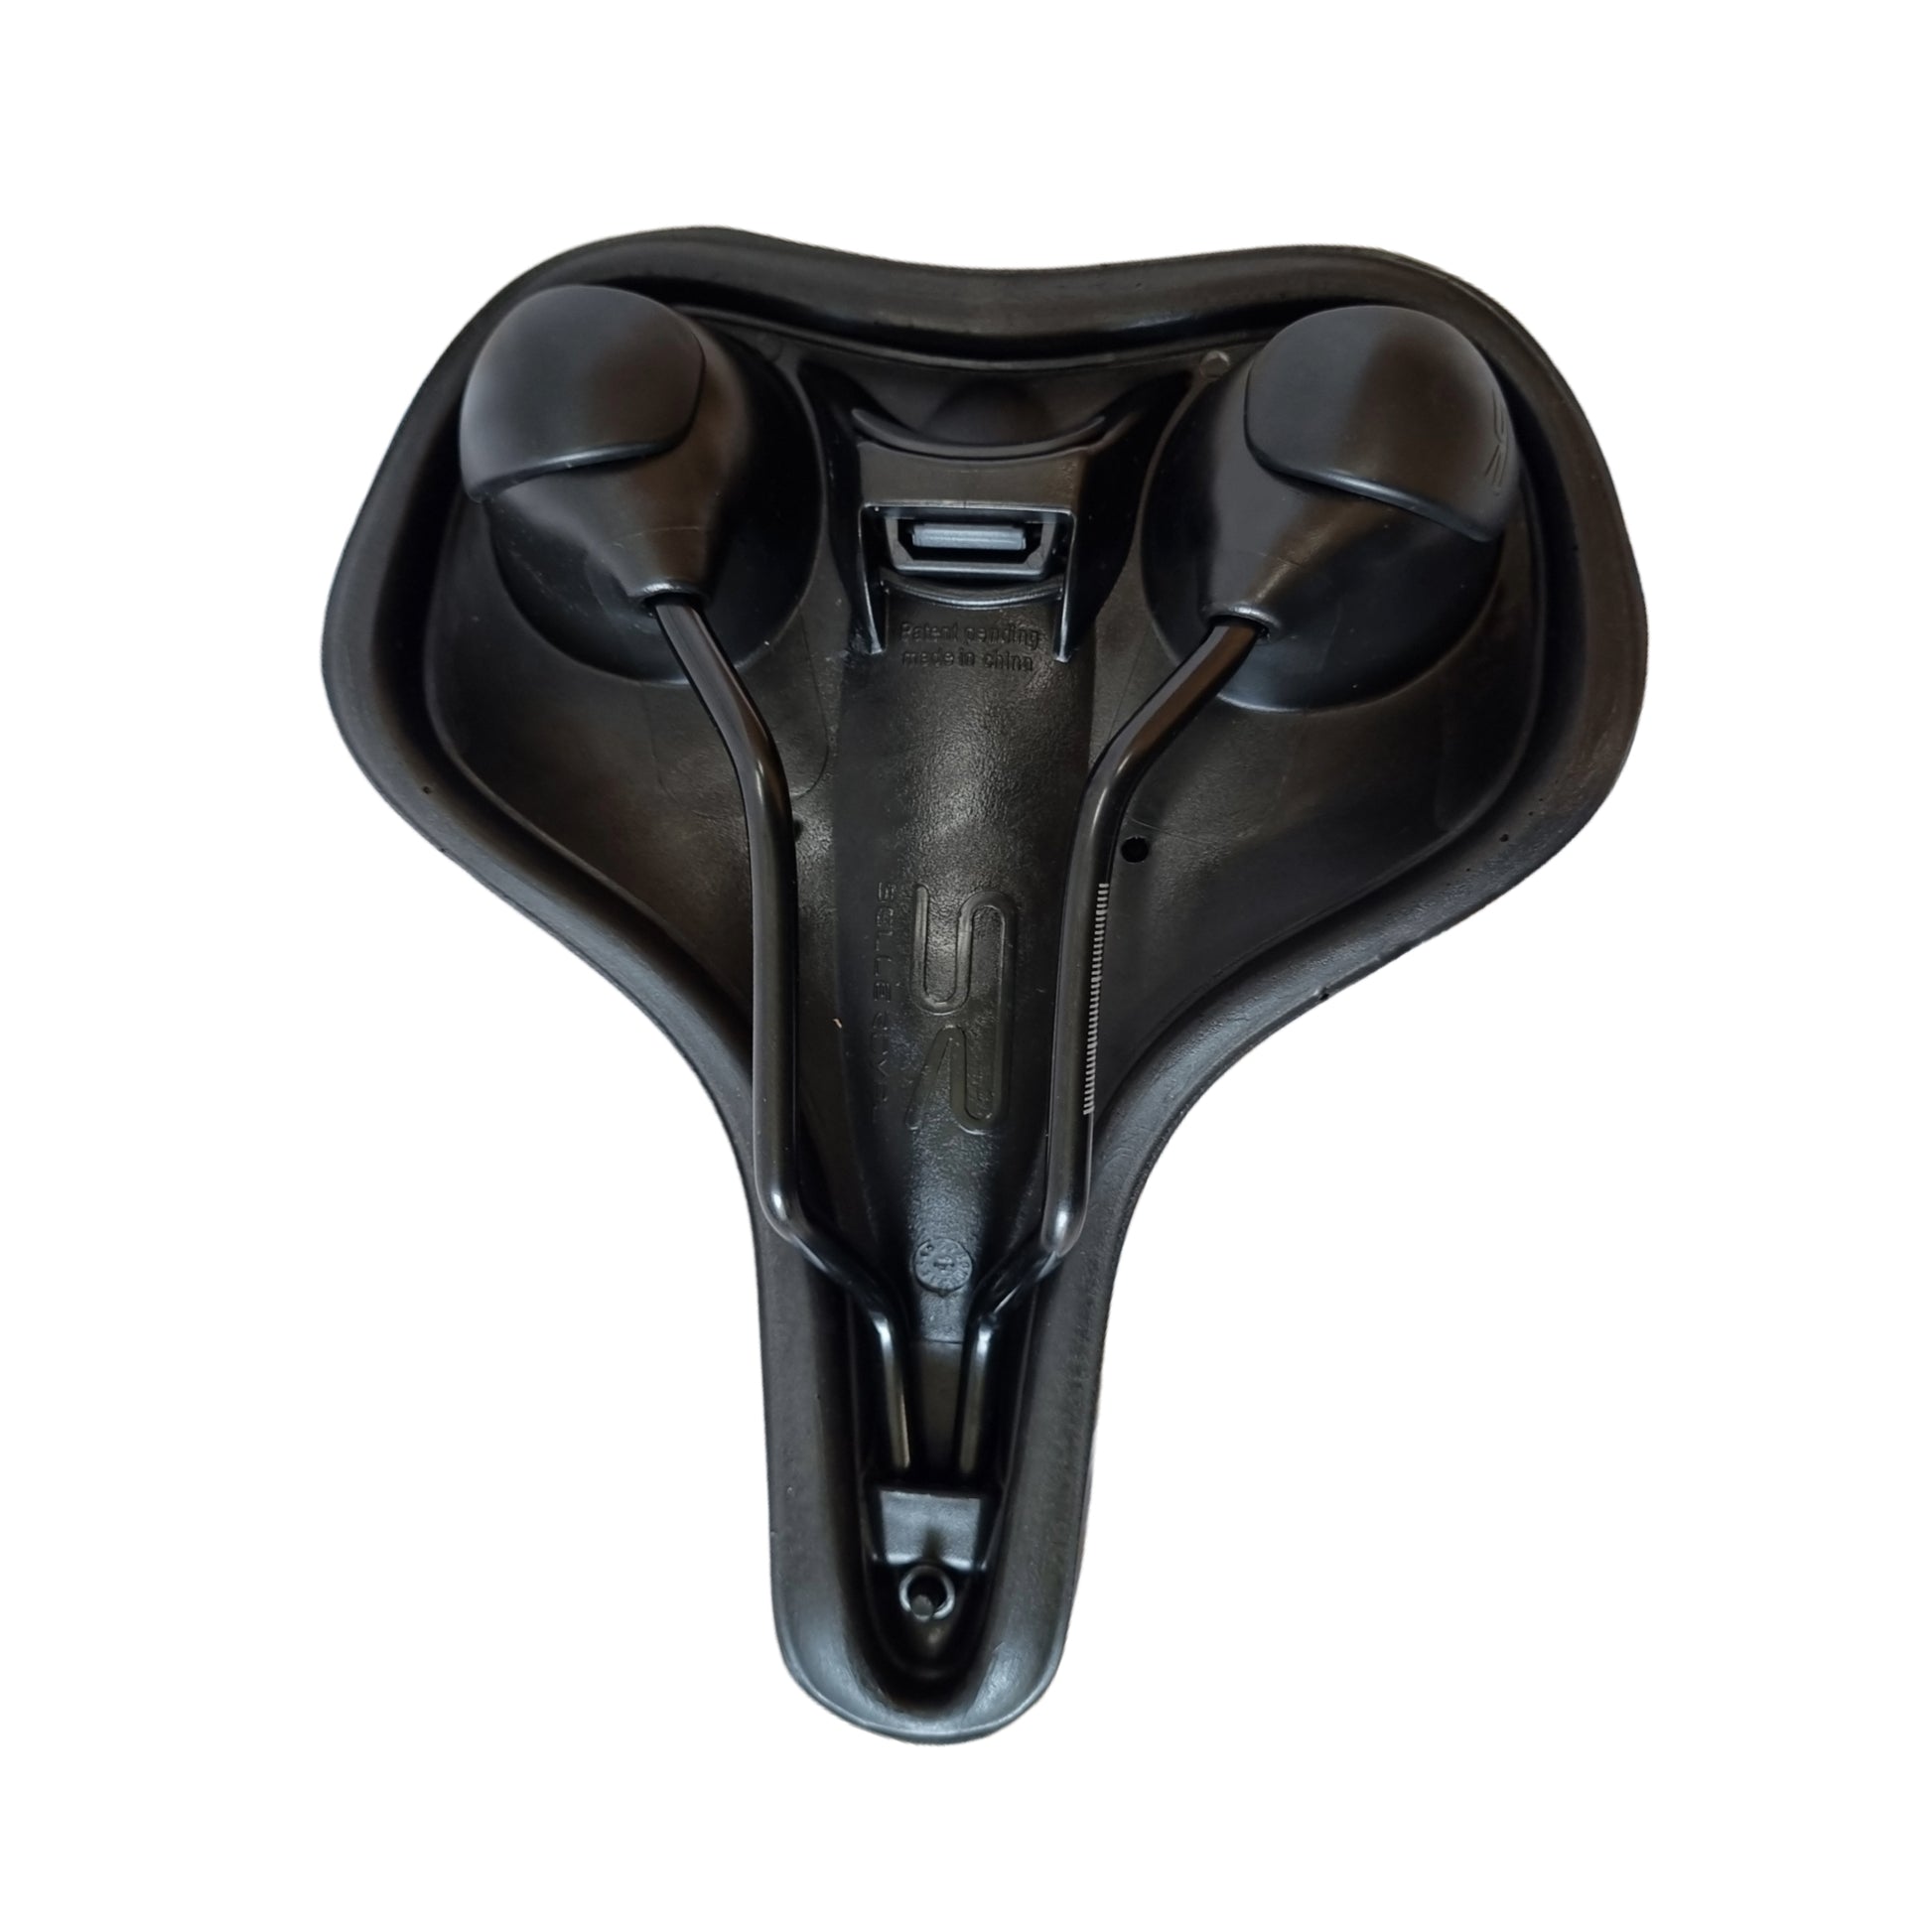 Selle Royal Saddle  GAZELLA For MTB  Mountain Cycling Saddle Black side view  accessories by omobikes 